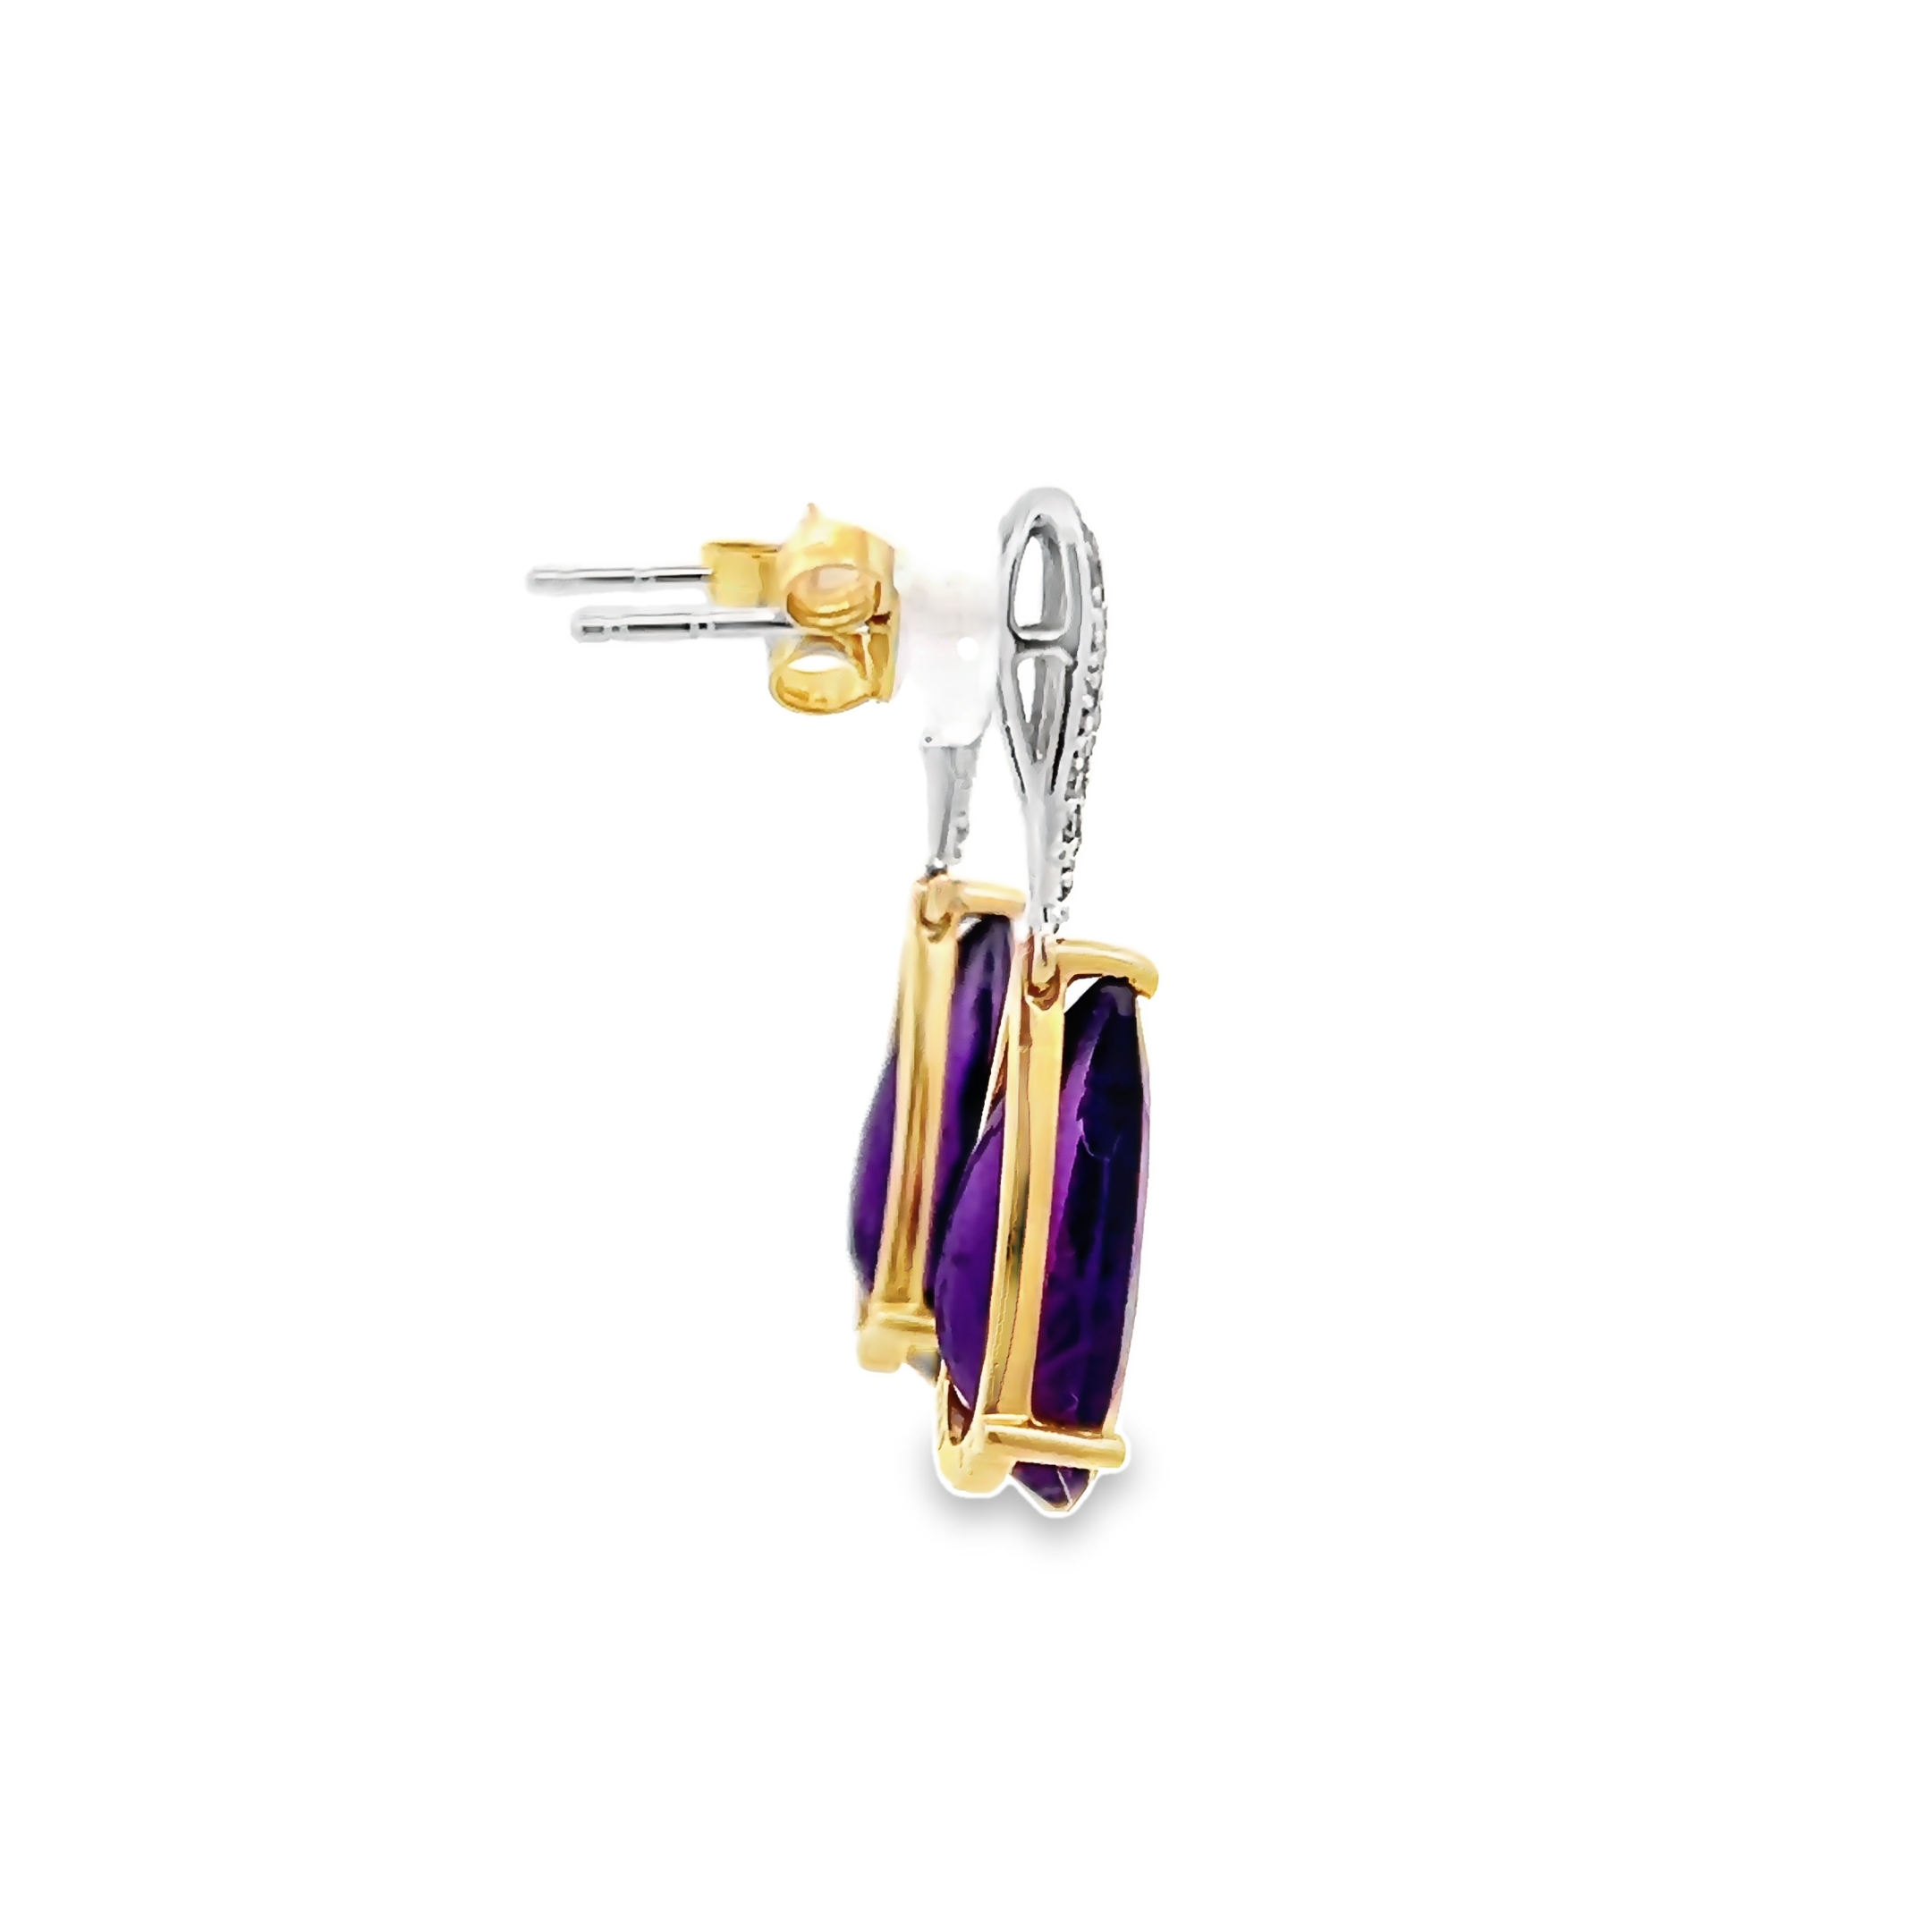 14k White And Yellow Gold Amethyst Drop Earrings